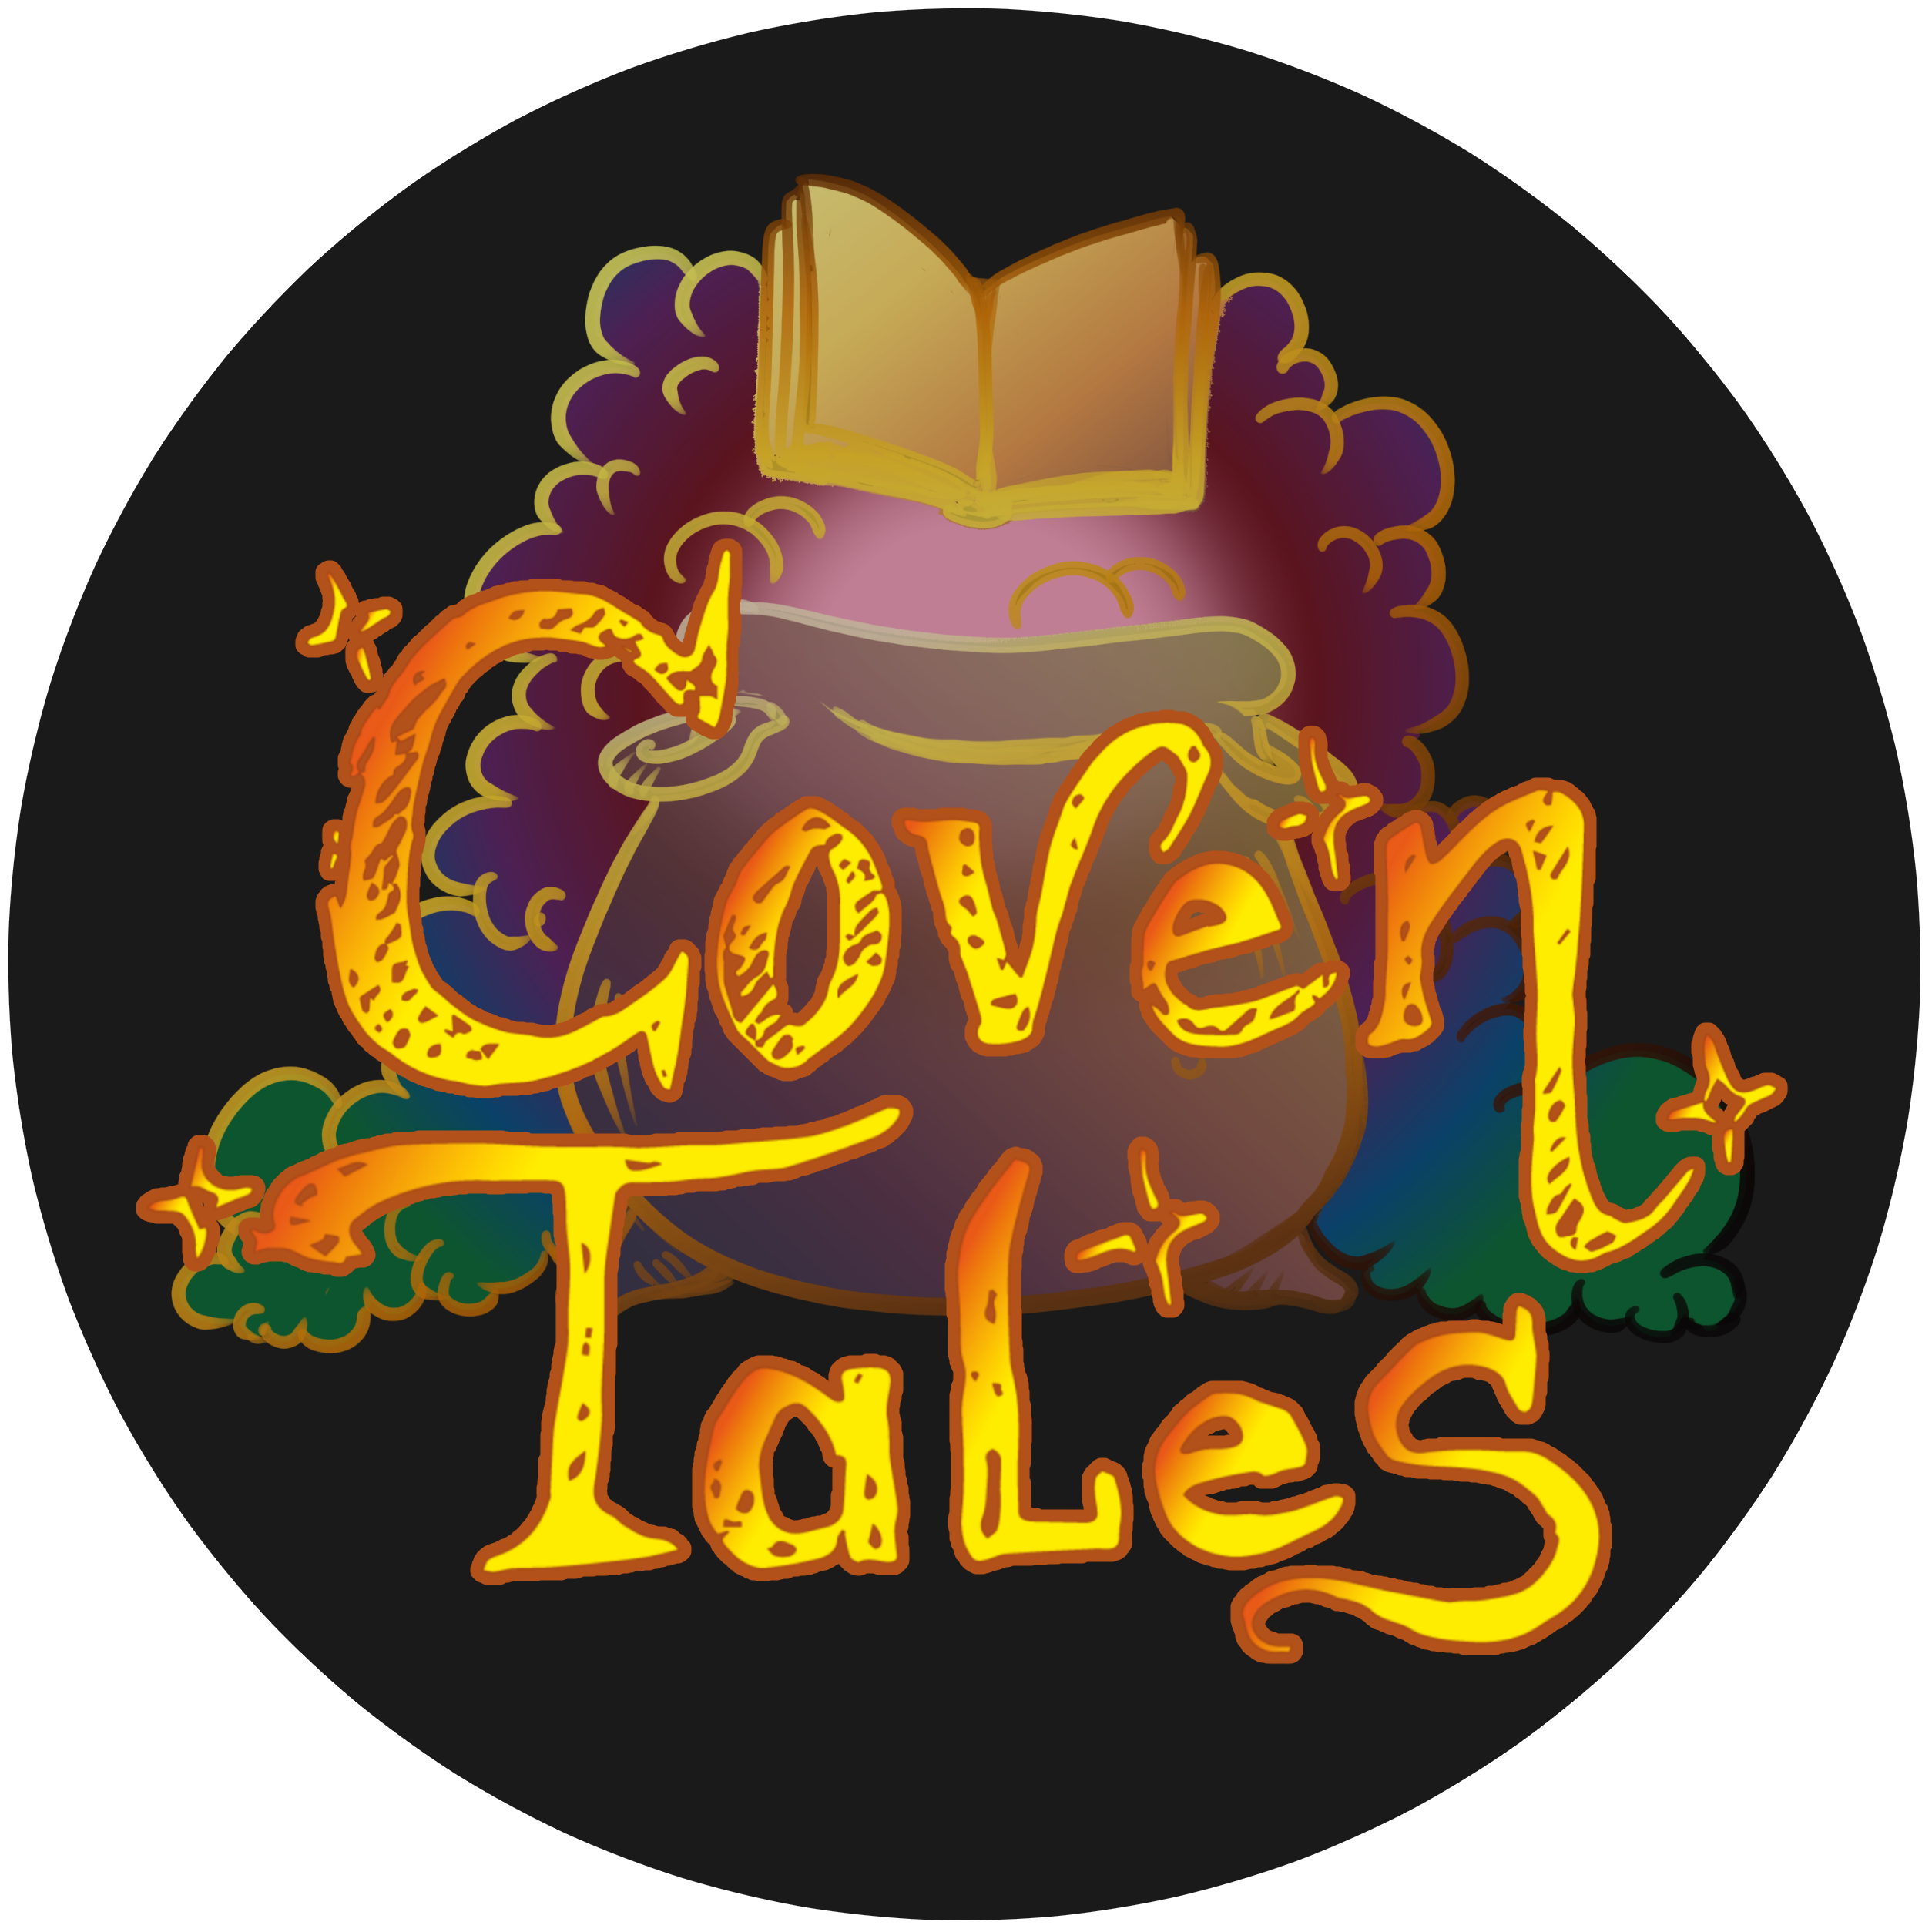 Coven Tales